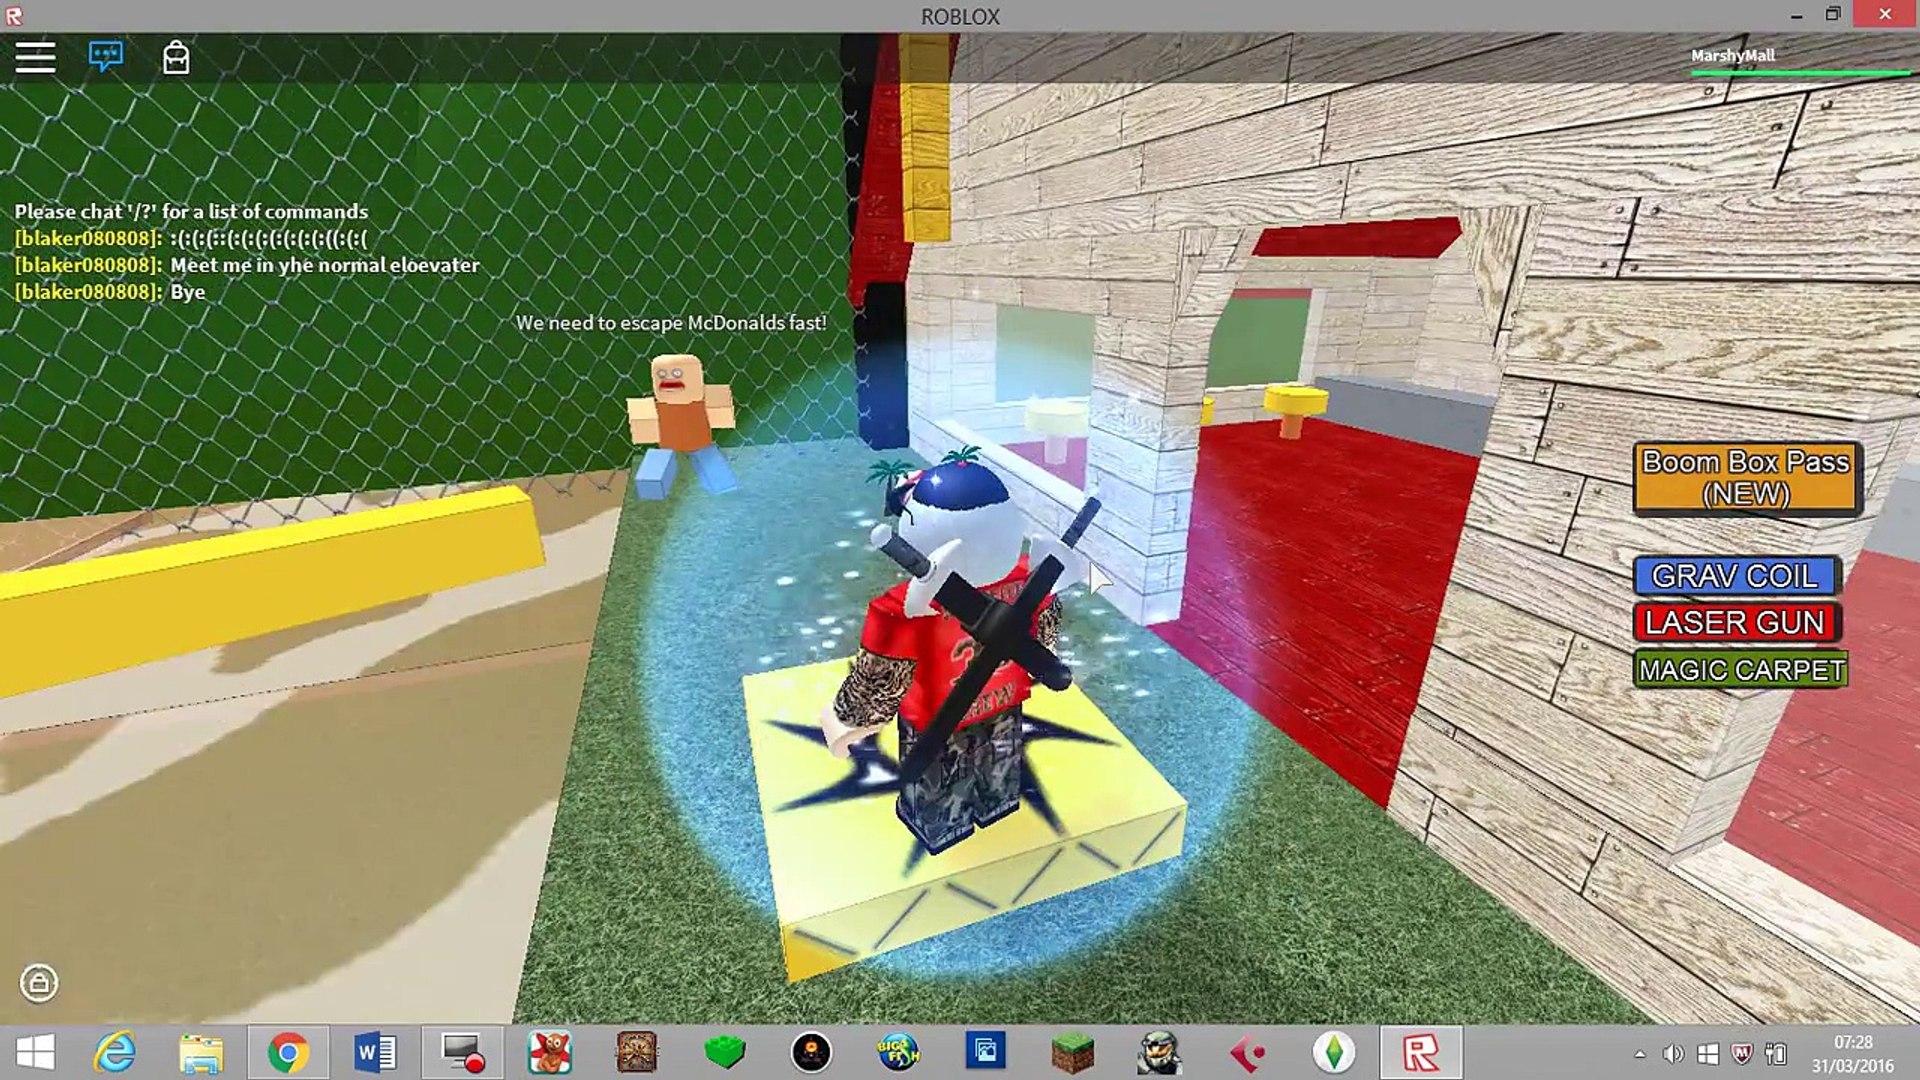 Escape Mcdonalds Obby Roblox Is That Blue Cheese - roblox escape the evil mall obby i died at mcdonalds im not lovin it